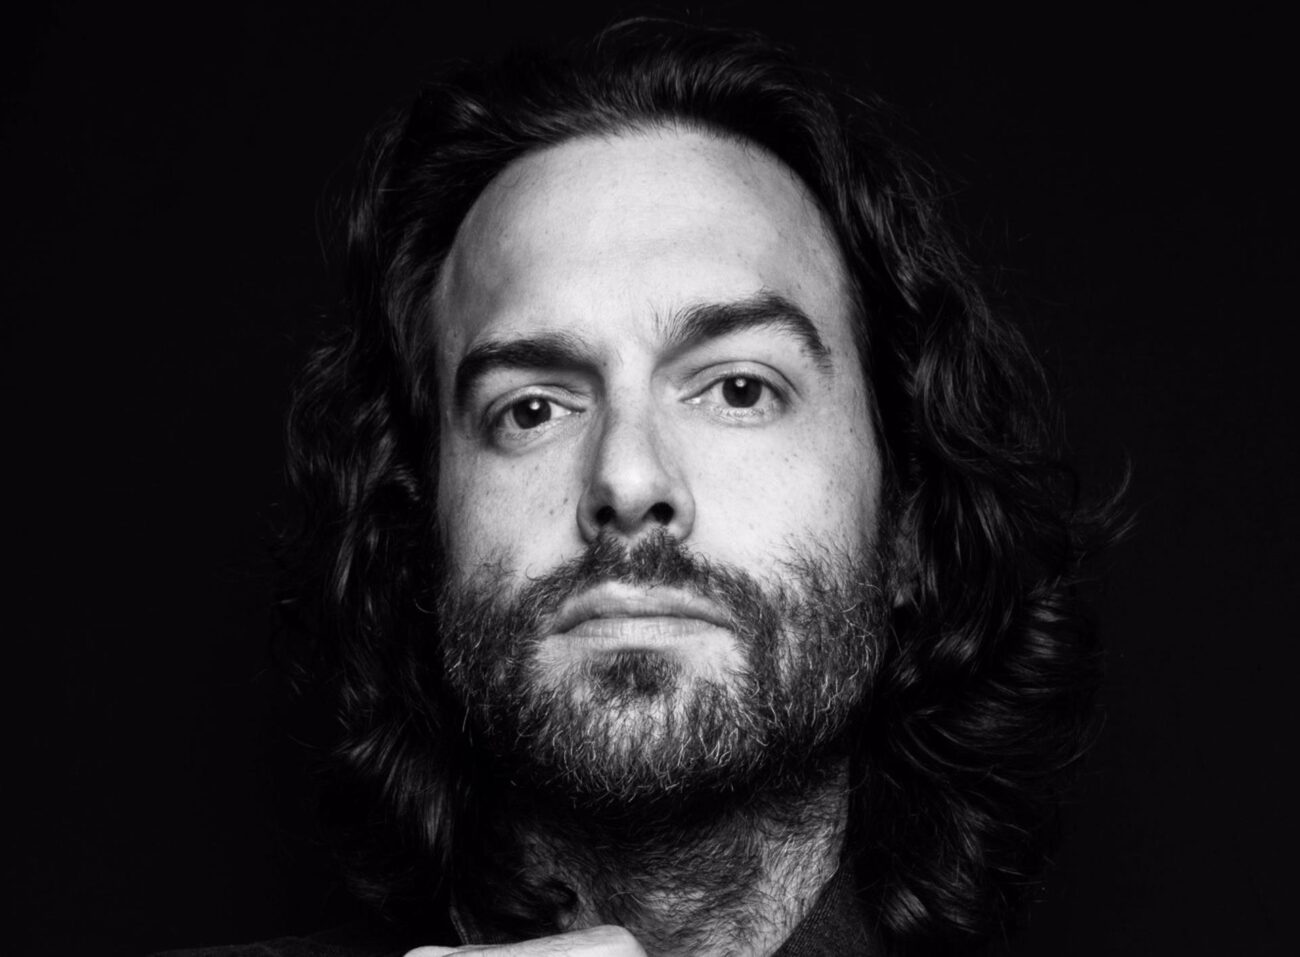 Chris D'Elia is facing a new lawsuit, only weeks after making an apology video regarding a slew of 2020 allegations. Is this the end of the "You" star?